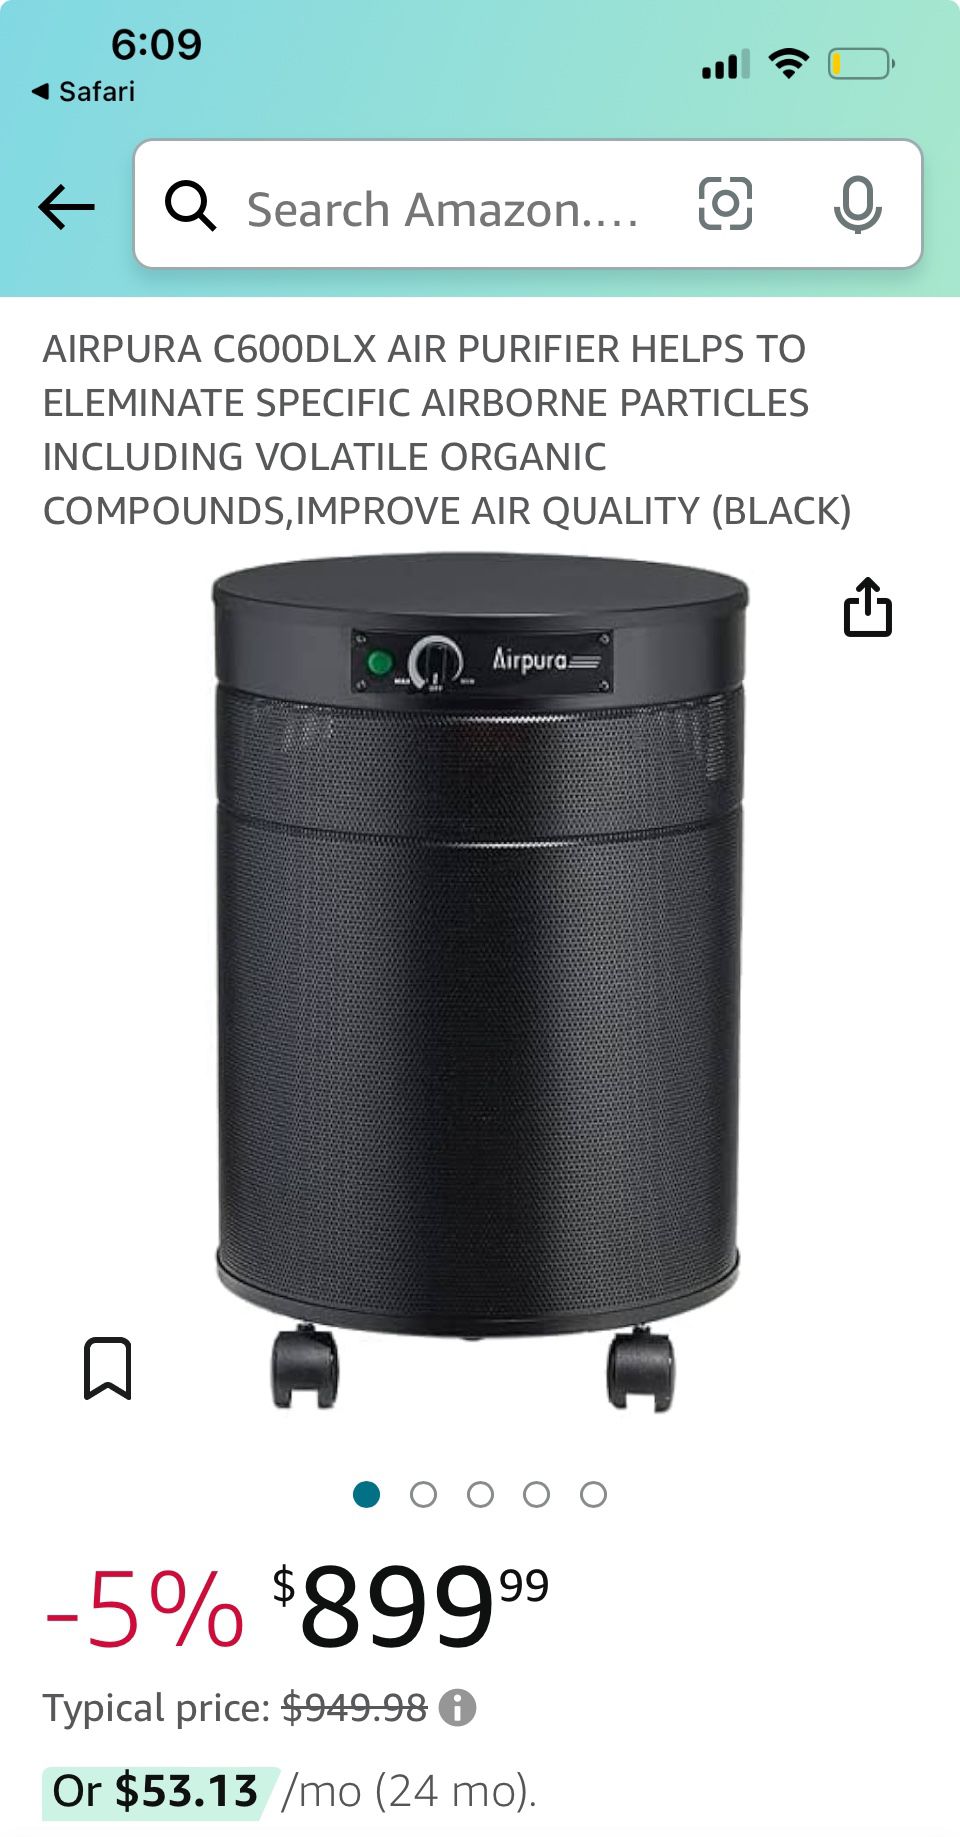 AIRPURA C600DLX AIR PURIFIER HELPS TO ELEMINATE SPECIFIC AIRBORNE PARTICLES INCLUDING VOLATILE ORGANIC COMPOUNDS,IMPROVE AIR QUALITY